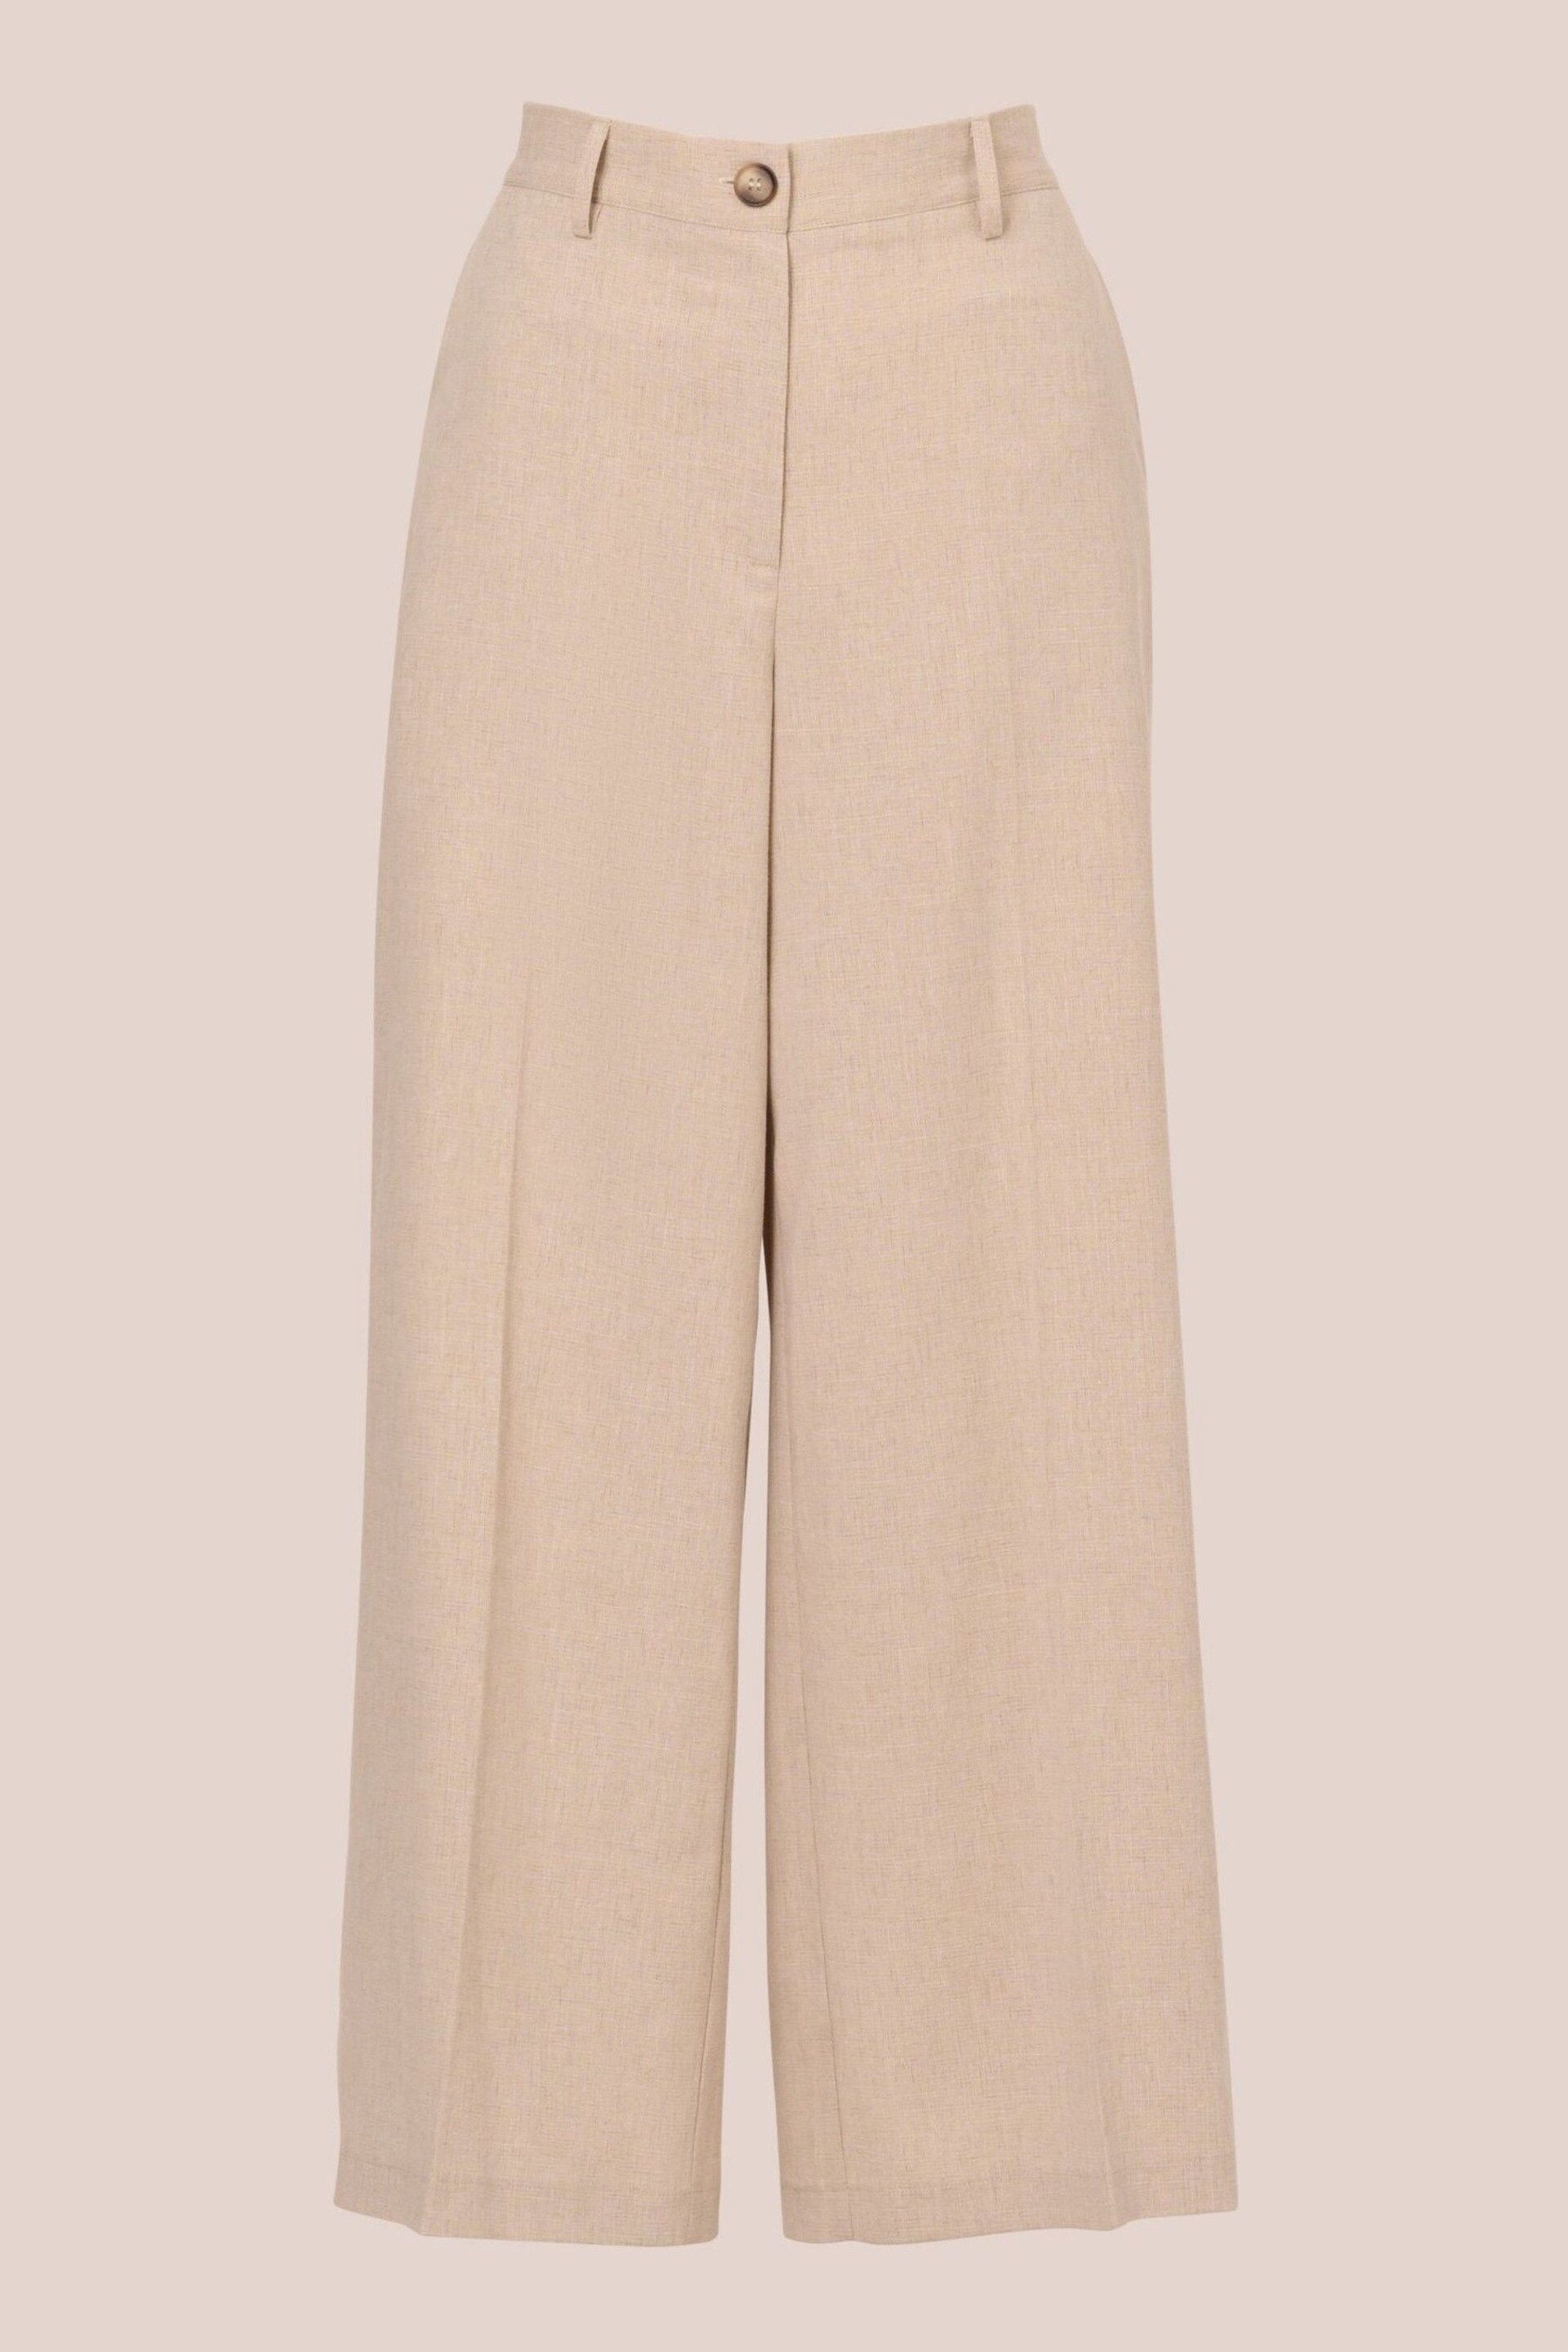 Adrianna Papell Natural Full Wide Leg Utility Trousers With Slash Pockets - Image 5 of 7